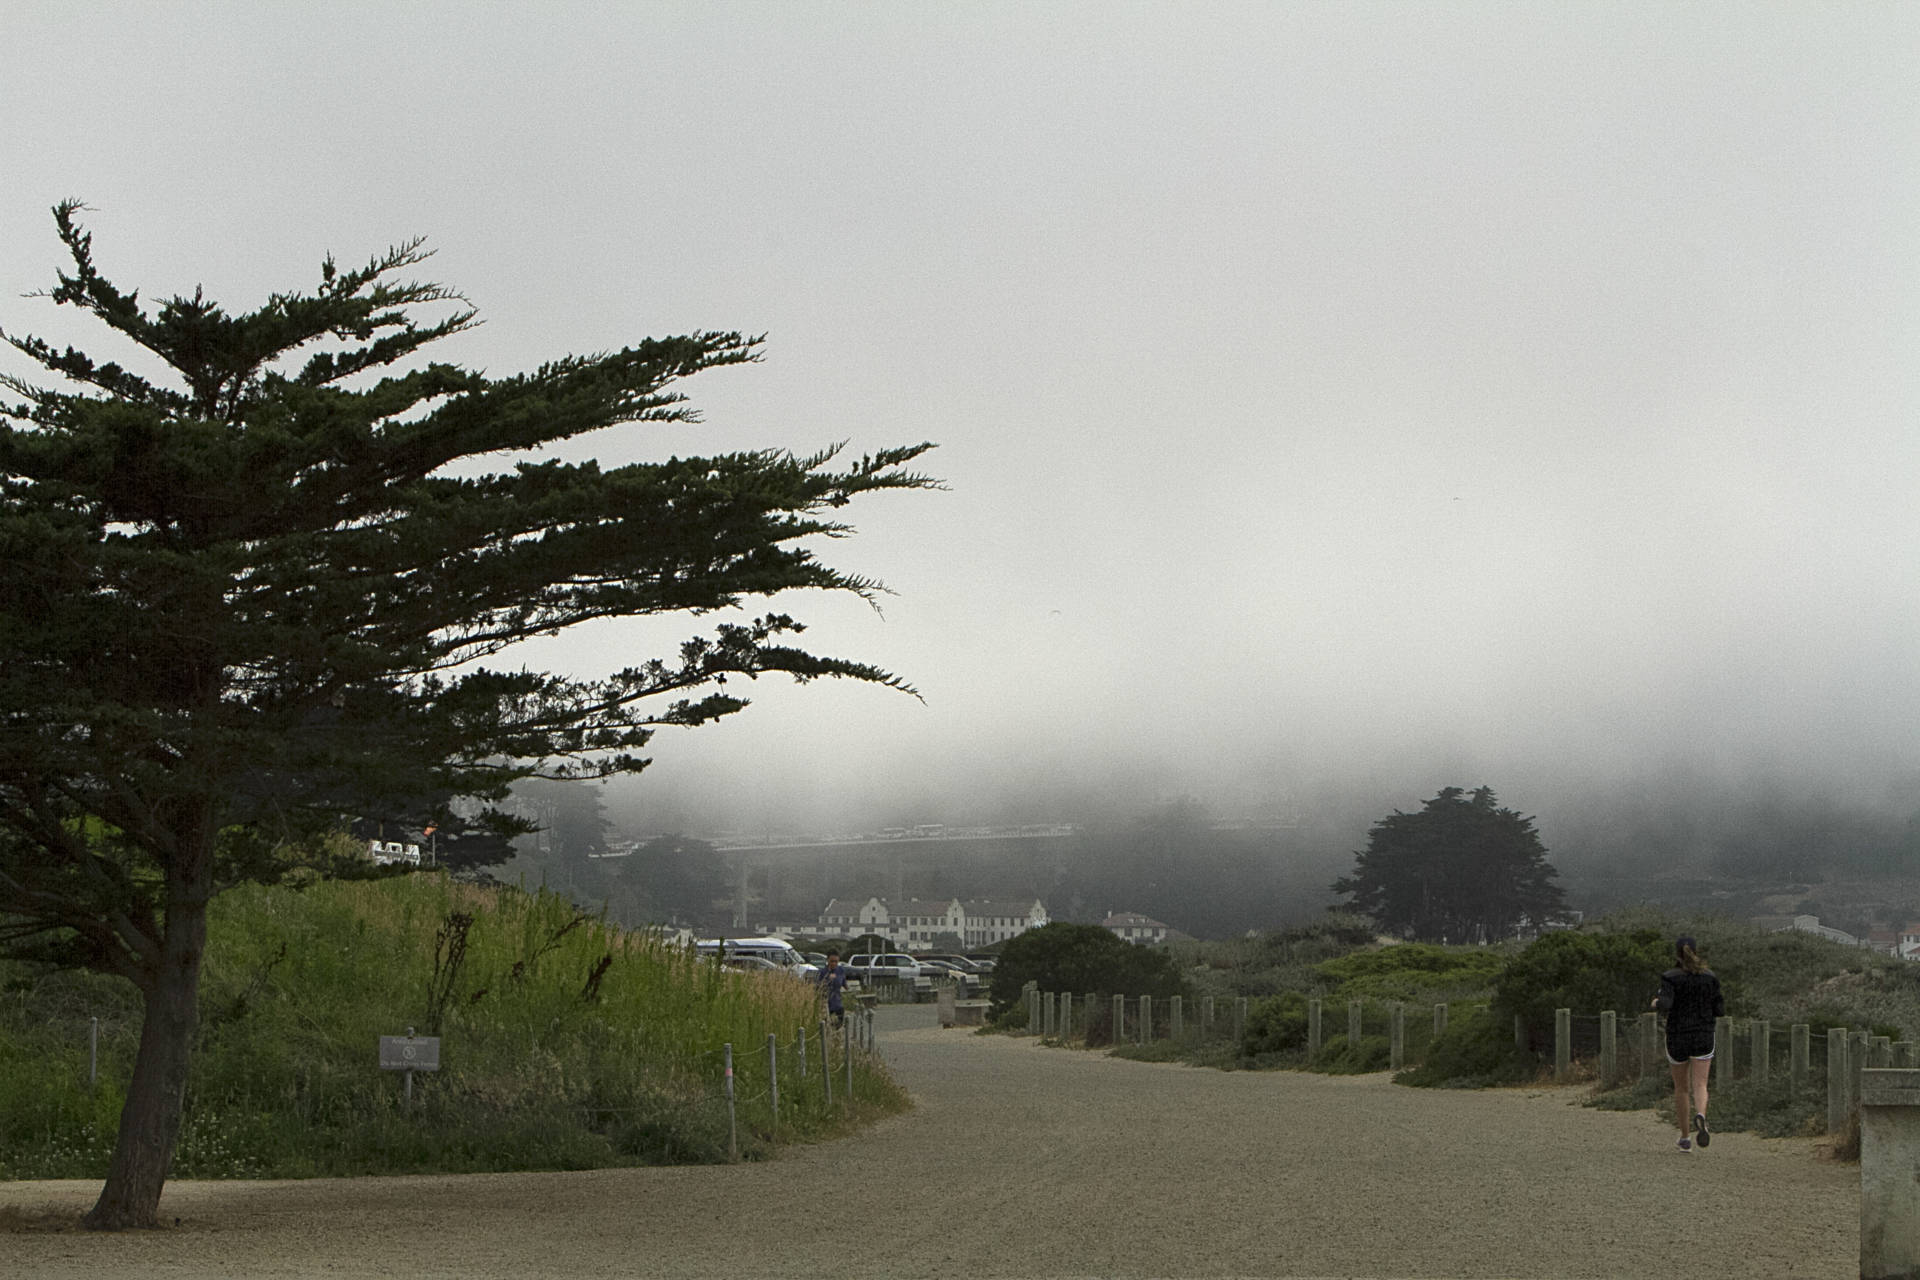 Fog settles over Crissy Field in the Marina neighborhood of San Francisco on July 13, 2018. Anne Wernikoff/KQED